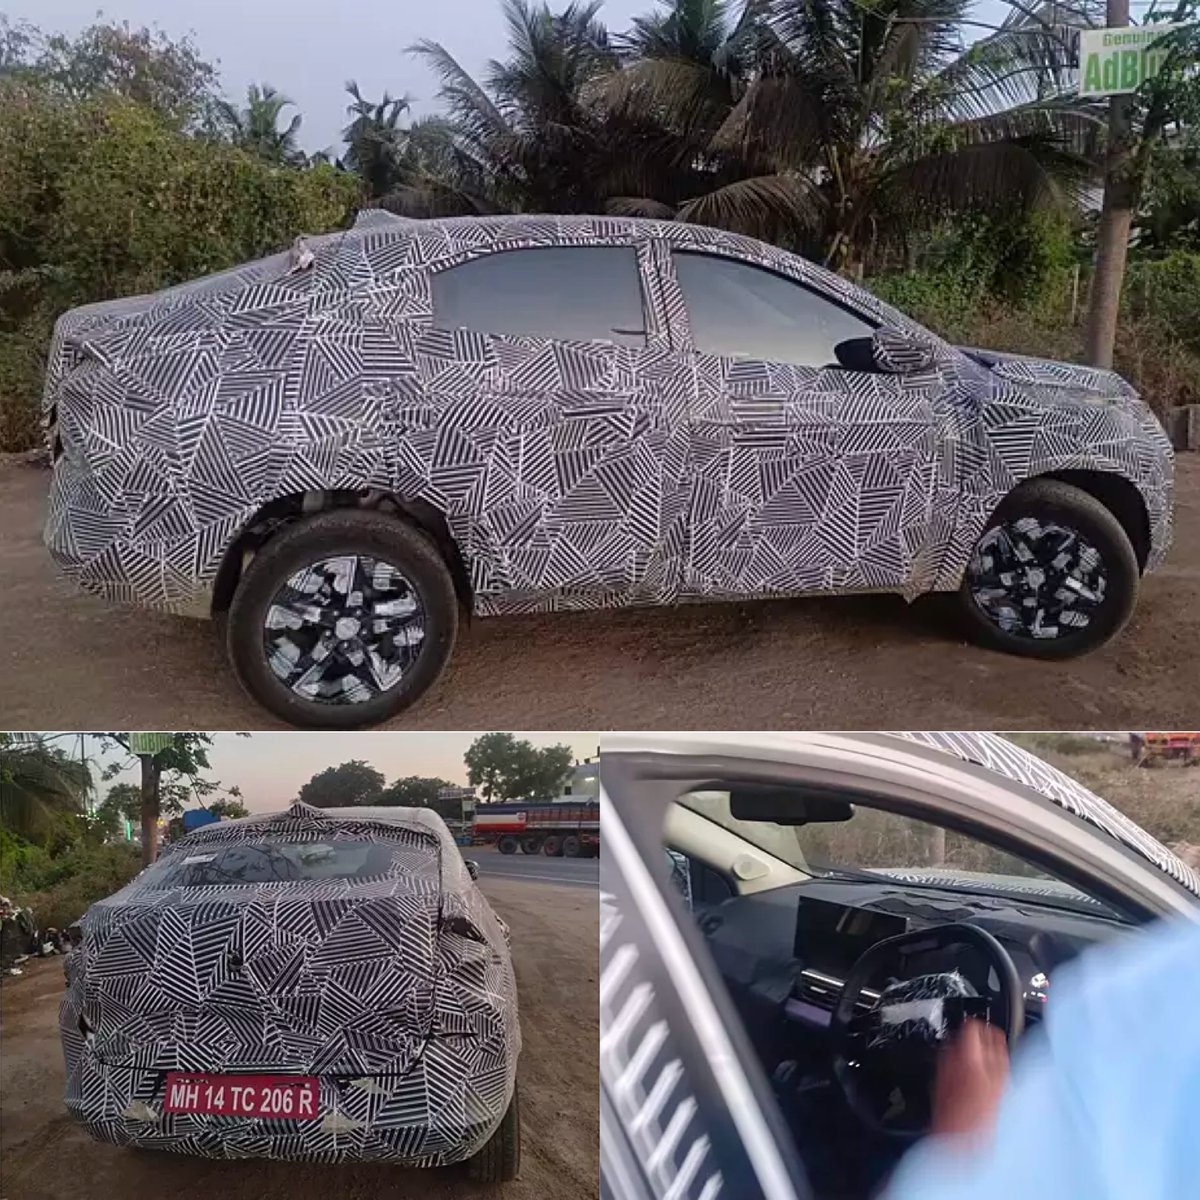 Tata Curvv has been spotted testing which gives us some glimpse of its interior layout.
Tata Curvv will compete with Citroen Basalt.

Image credit to respective owners.

Get more information about Tata Curvv  👇
teamignition.in
#tata #teamignition #tatacurvv #tatacurvvsuv